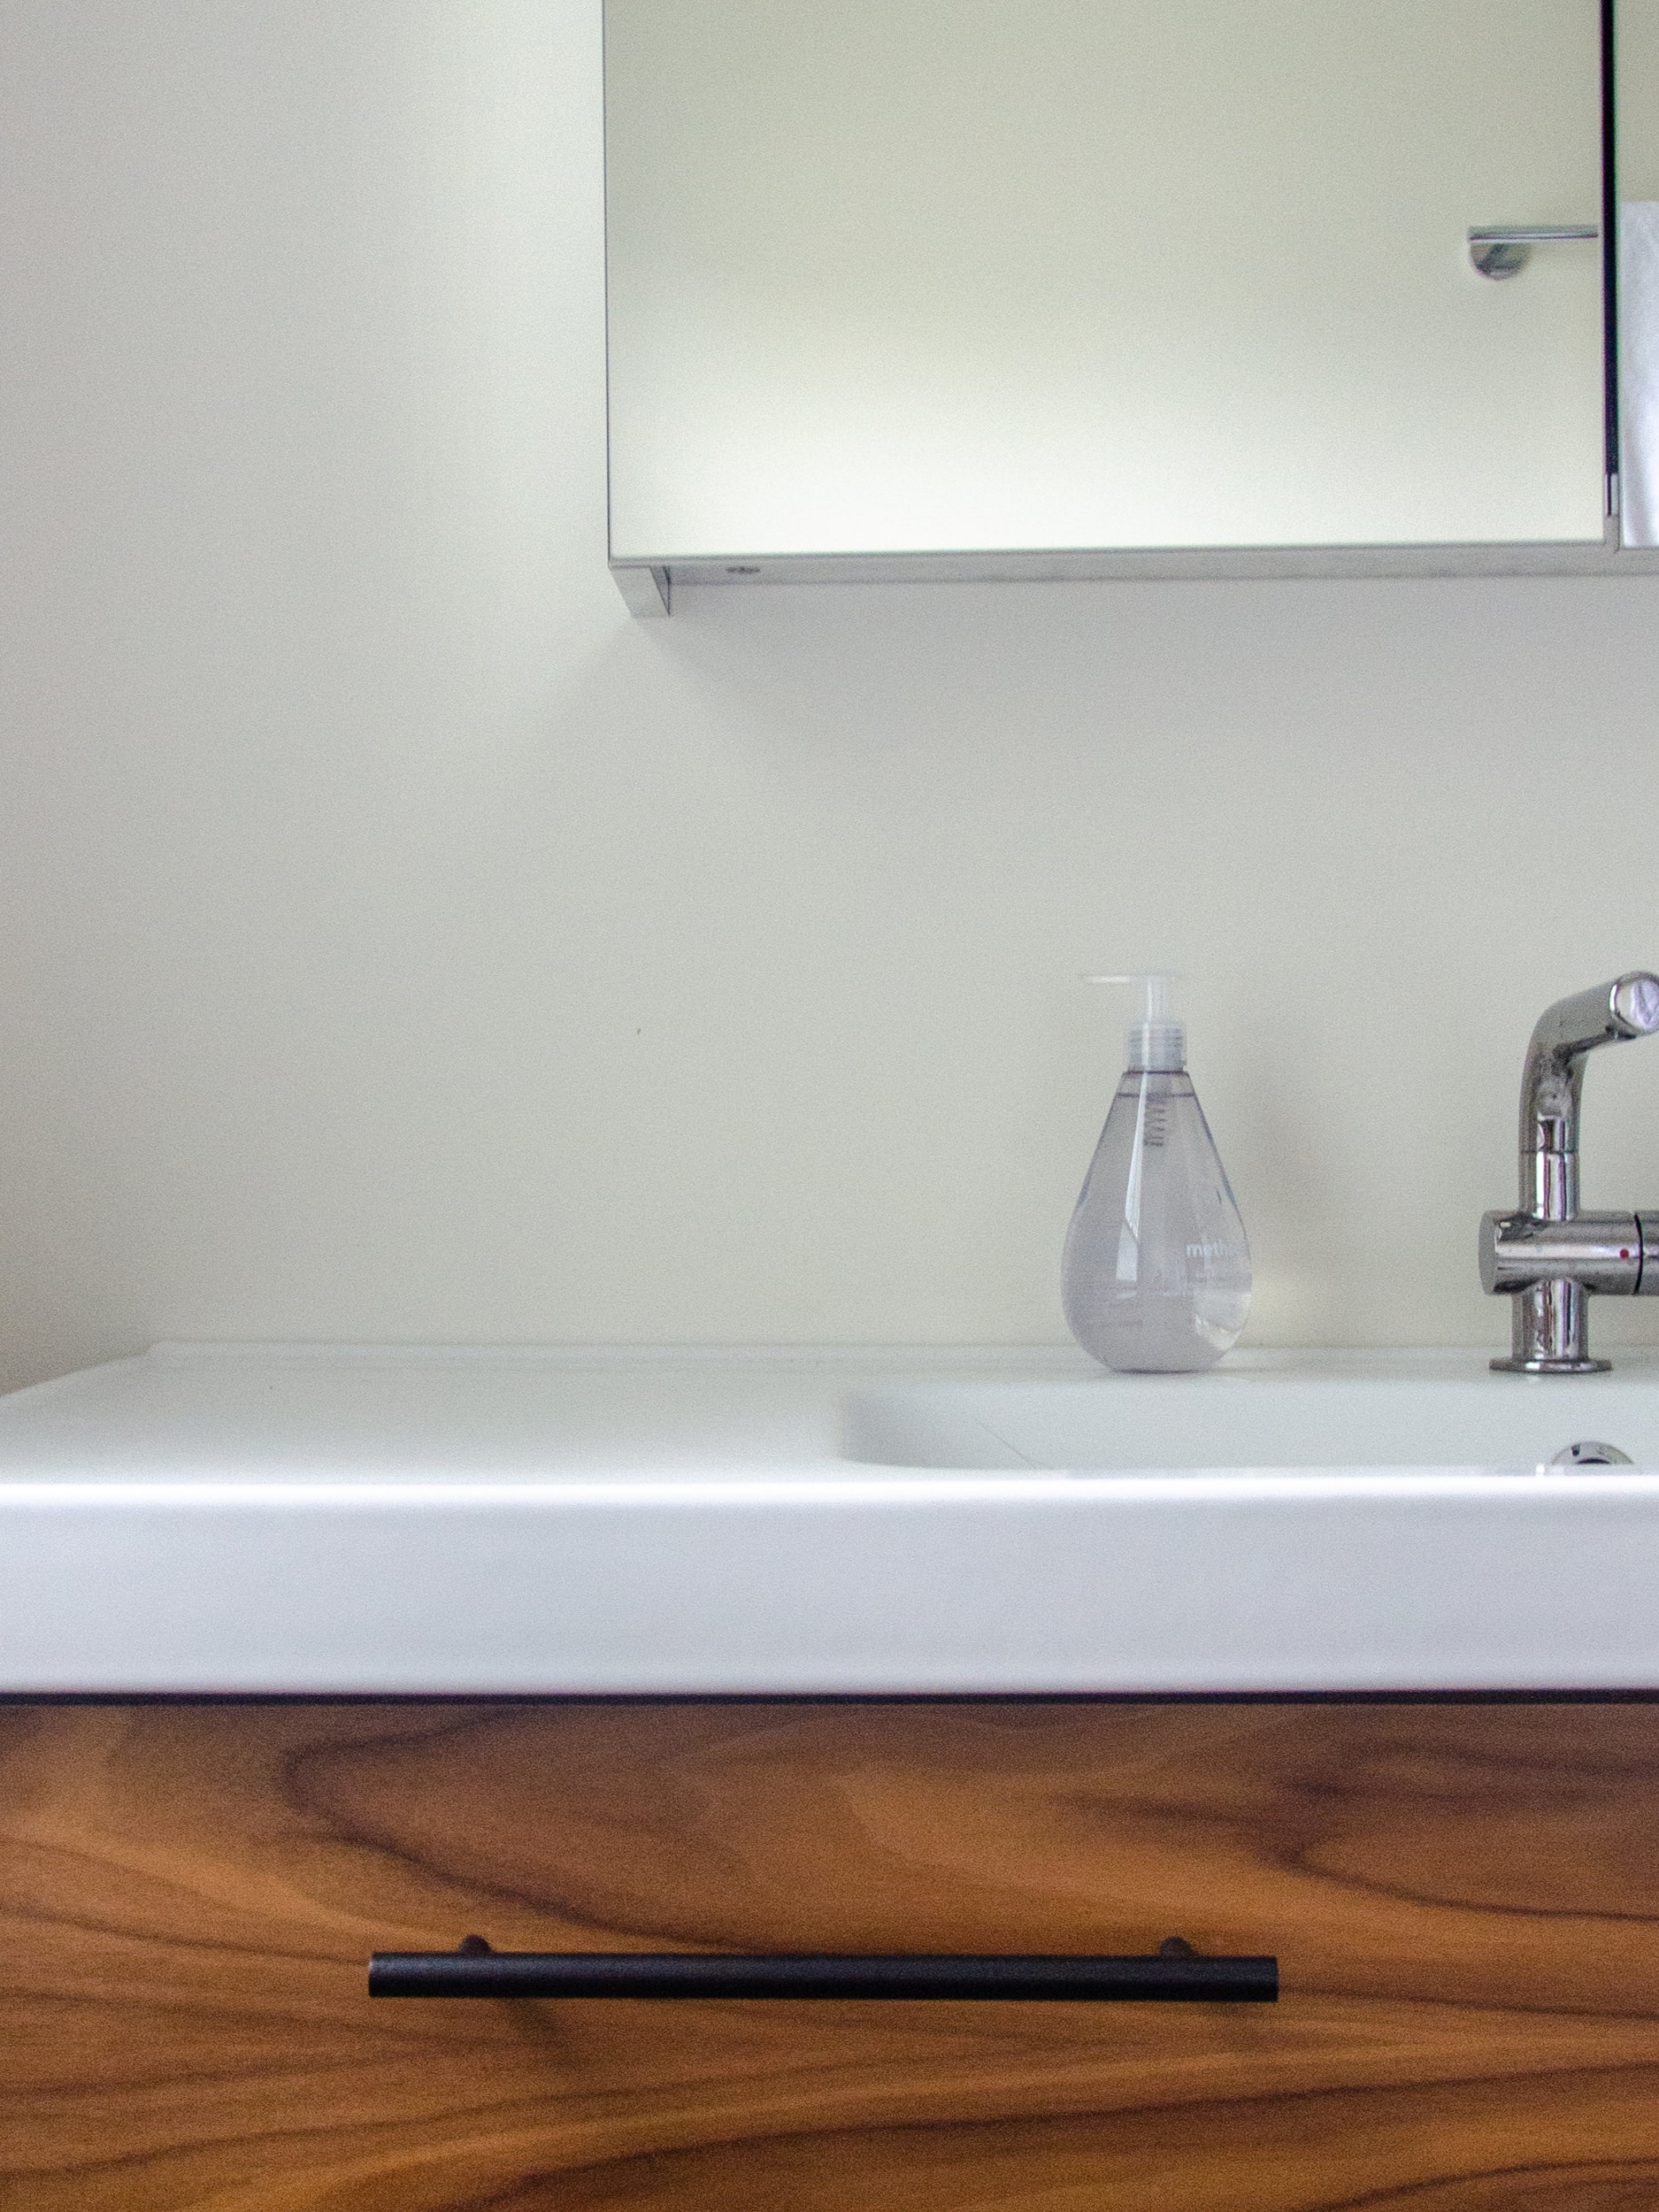 Ikea Godmorgon Bathroom Vanity And Mirror Our Review Salt Rook